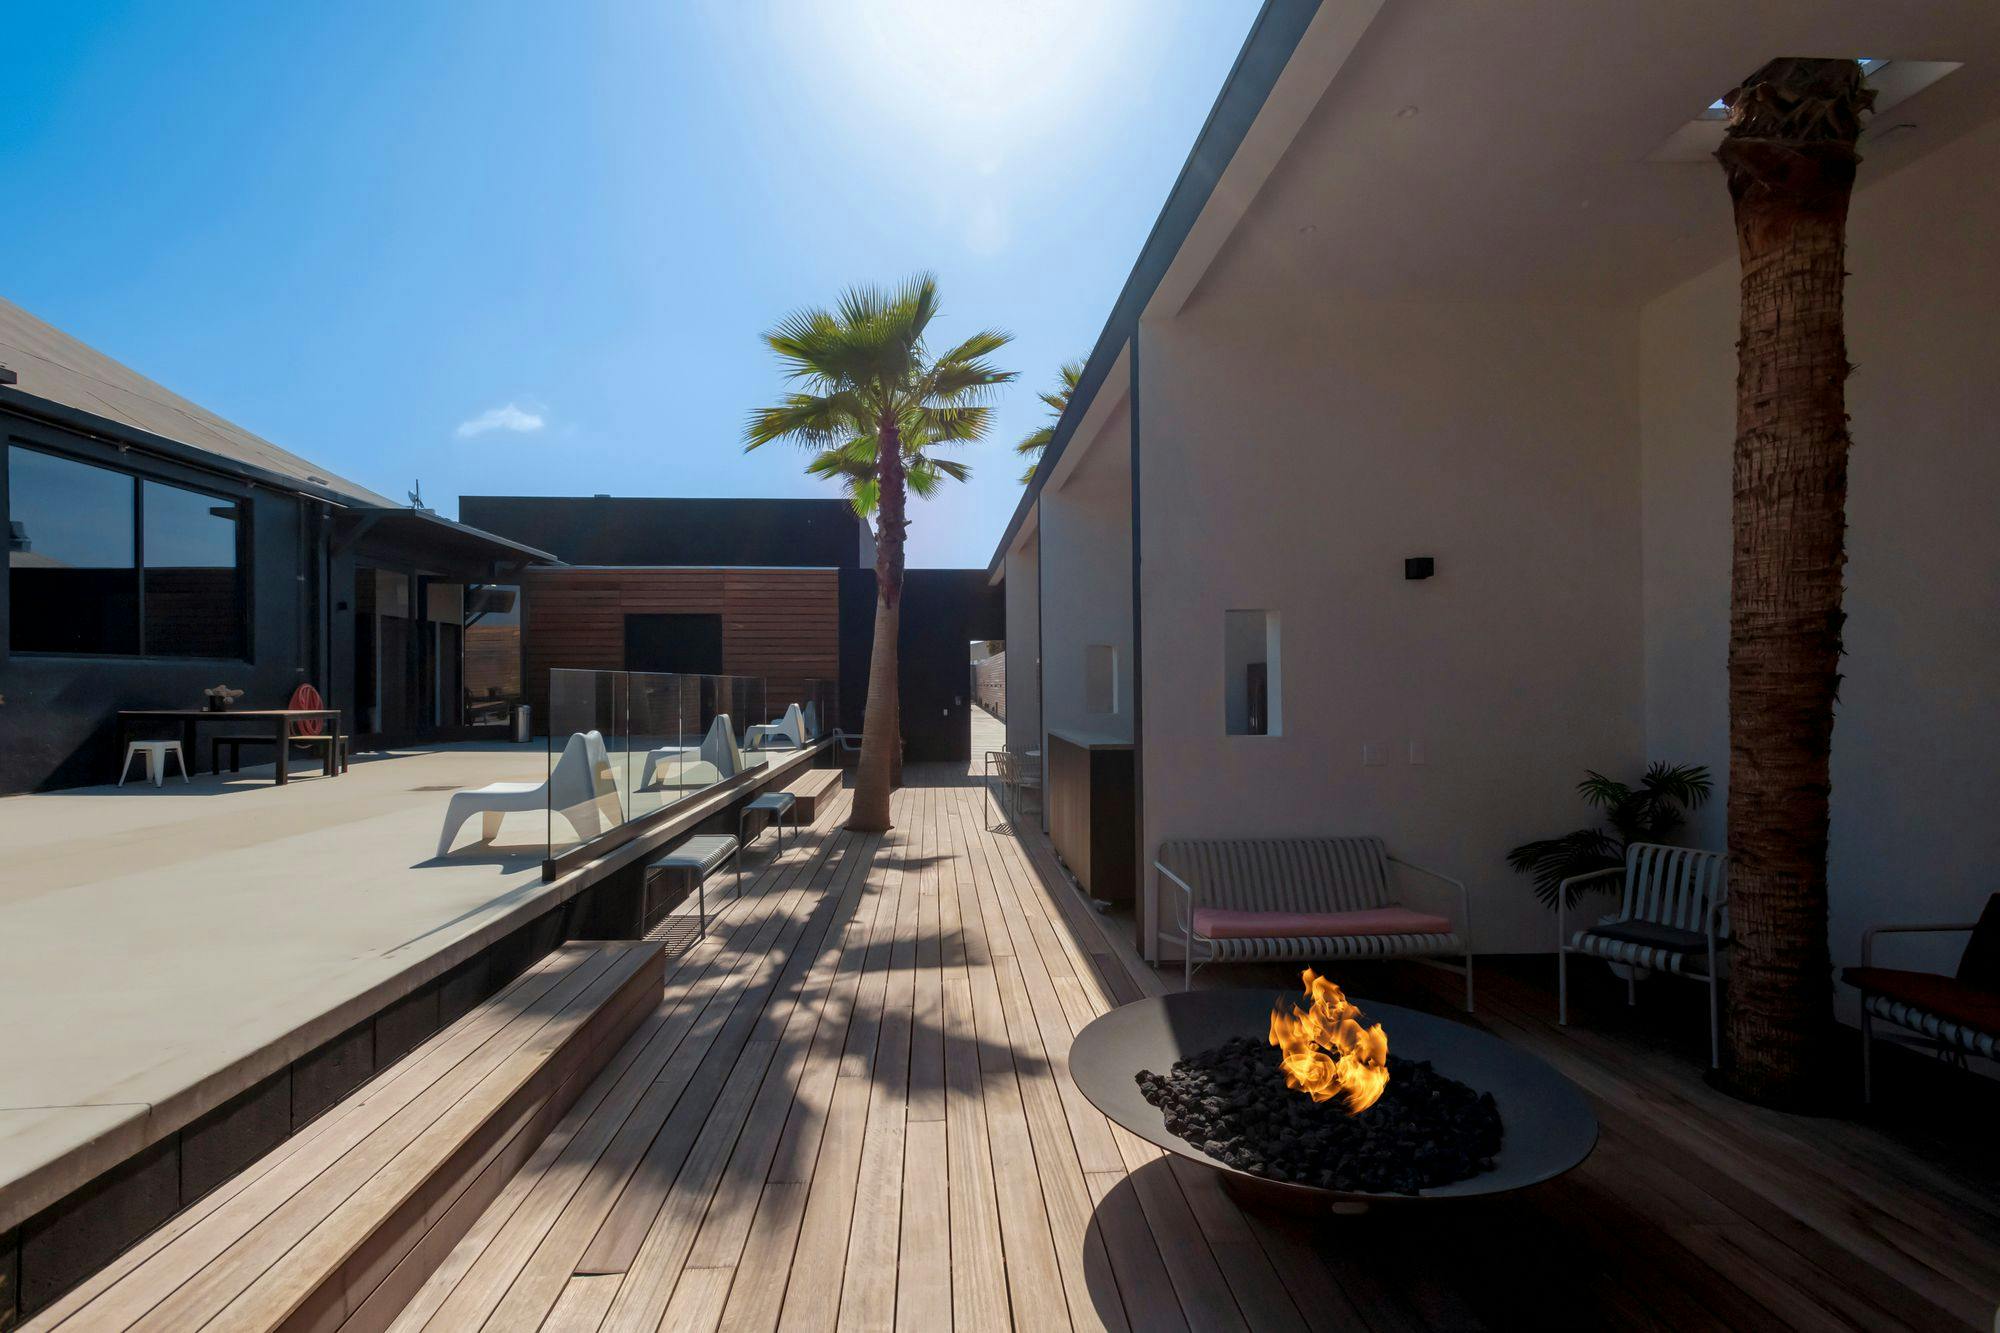 The photo displays an outdoor patio with a wooden deck, modern fire pit, sleek furniture, and a pair of palm trees, set against a backdrop of contemporary buildings.